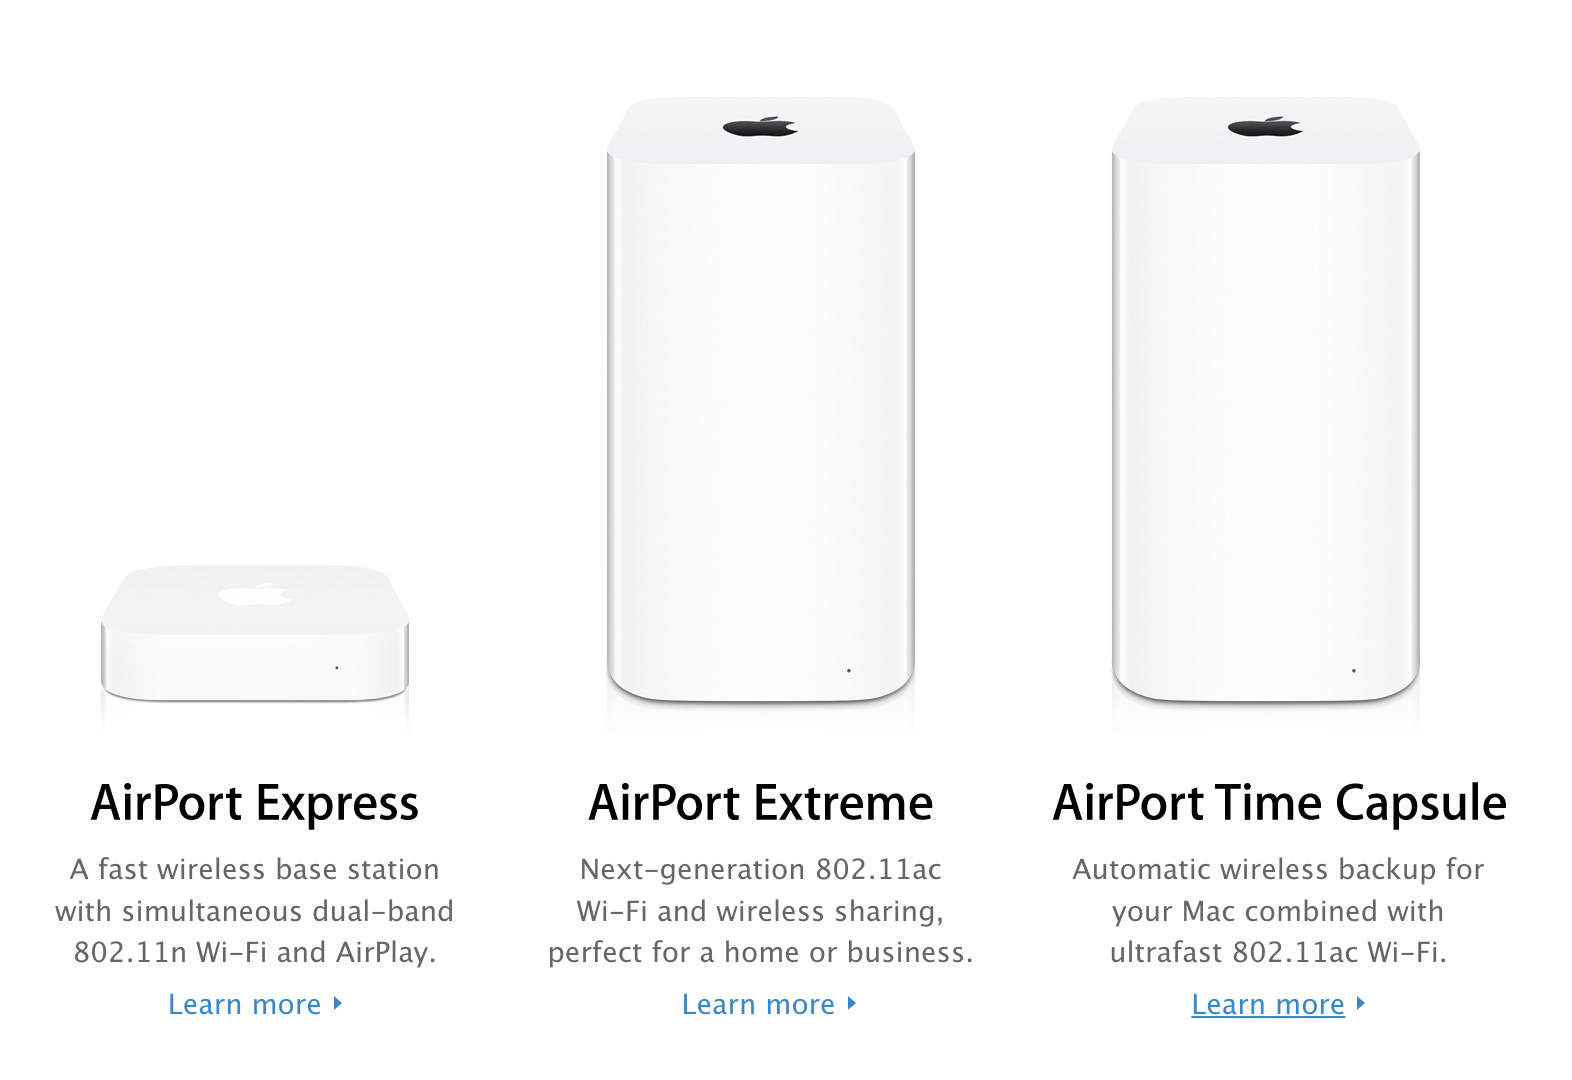 Forblive Forsvinde salami Does Apple (AAPL) Sell a Wireless Router? What Happened to the Apple AirPort?  - Bloomberg